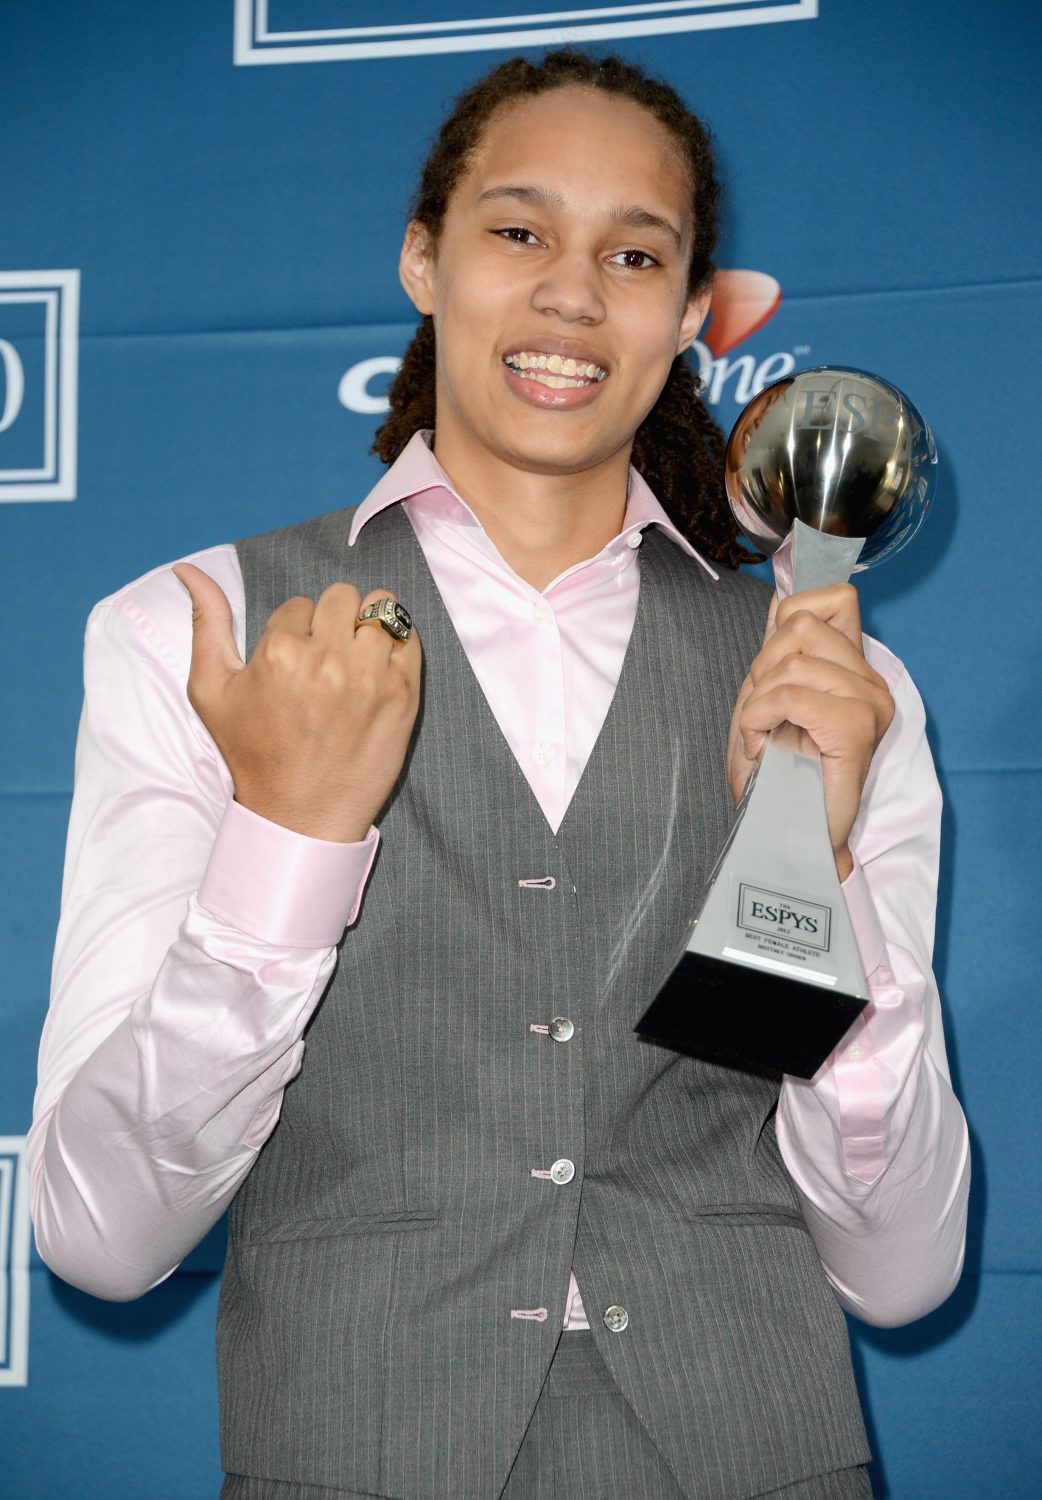 WNBA Star Brittney Griner Detained On Drug Charges In Russia For Carrying Vape Cartridges In Her Luggage